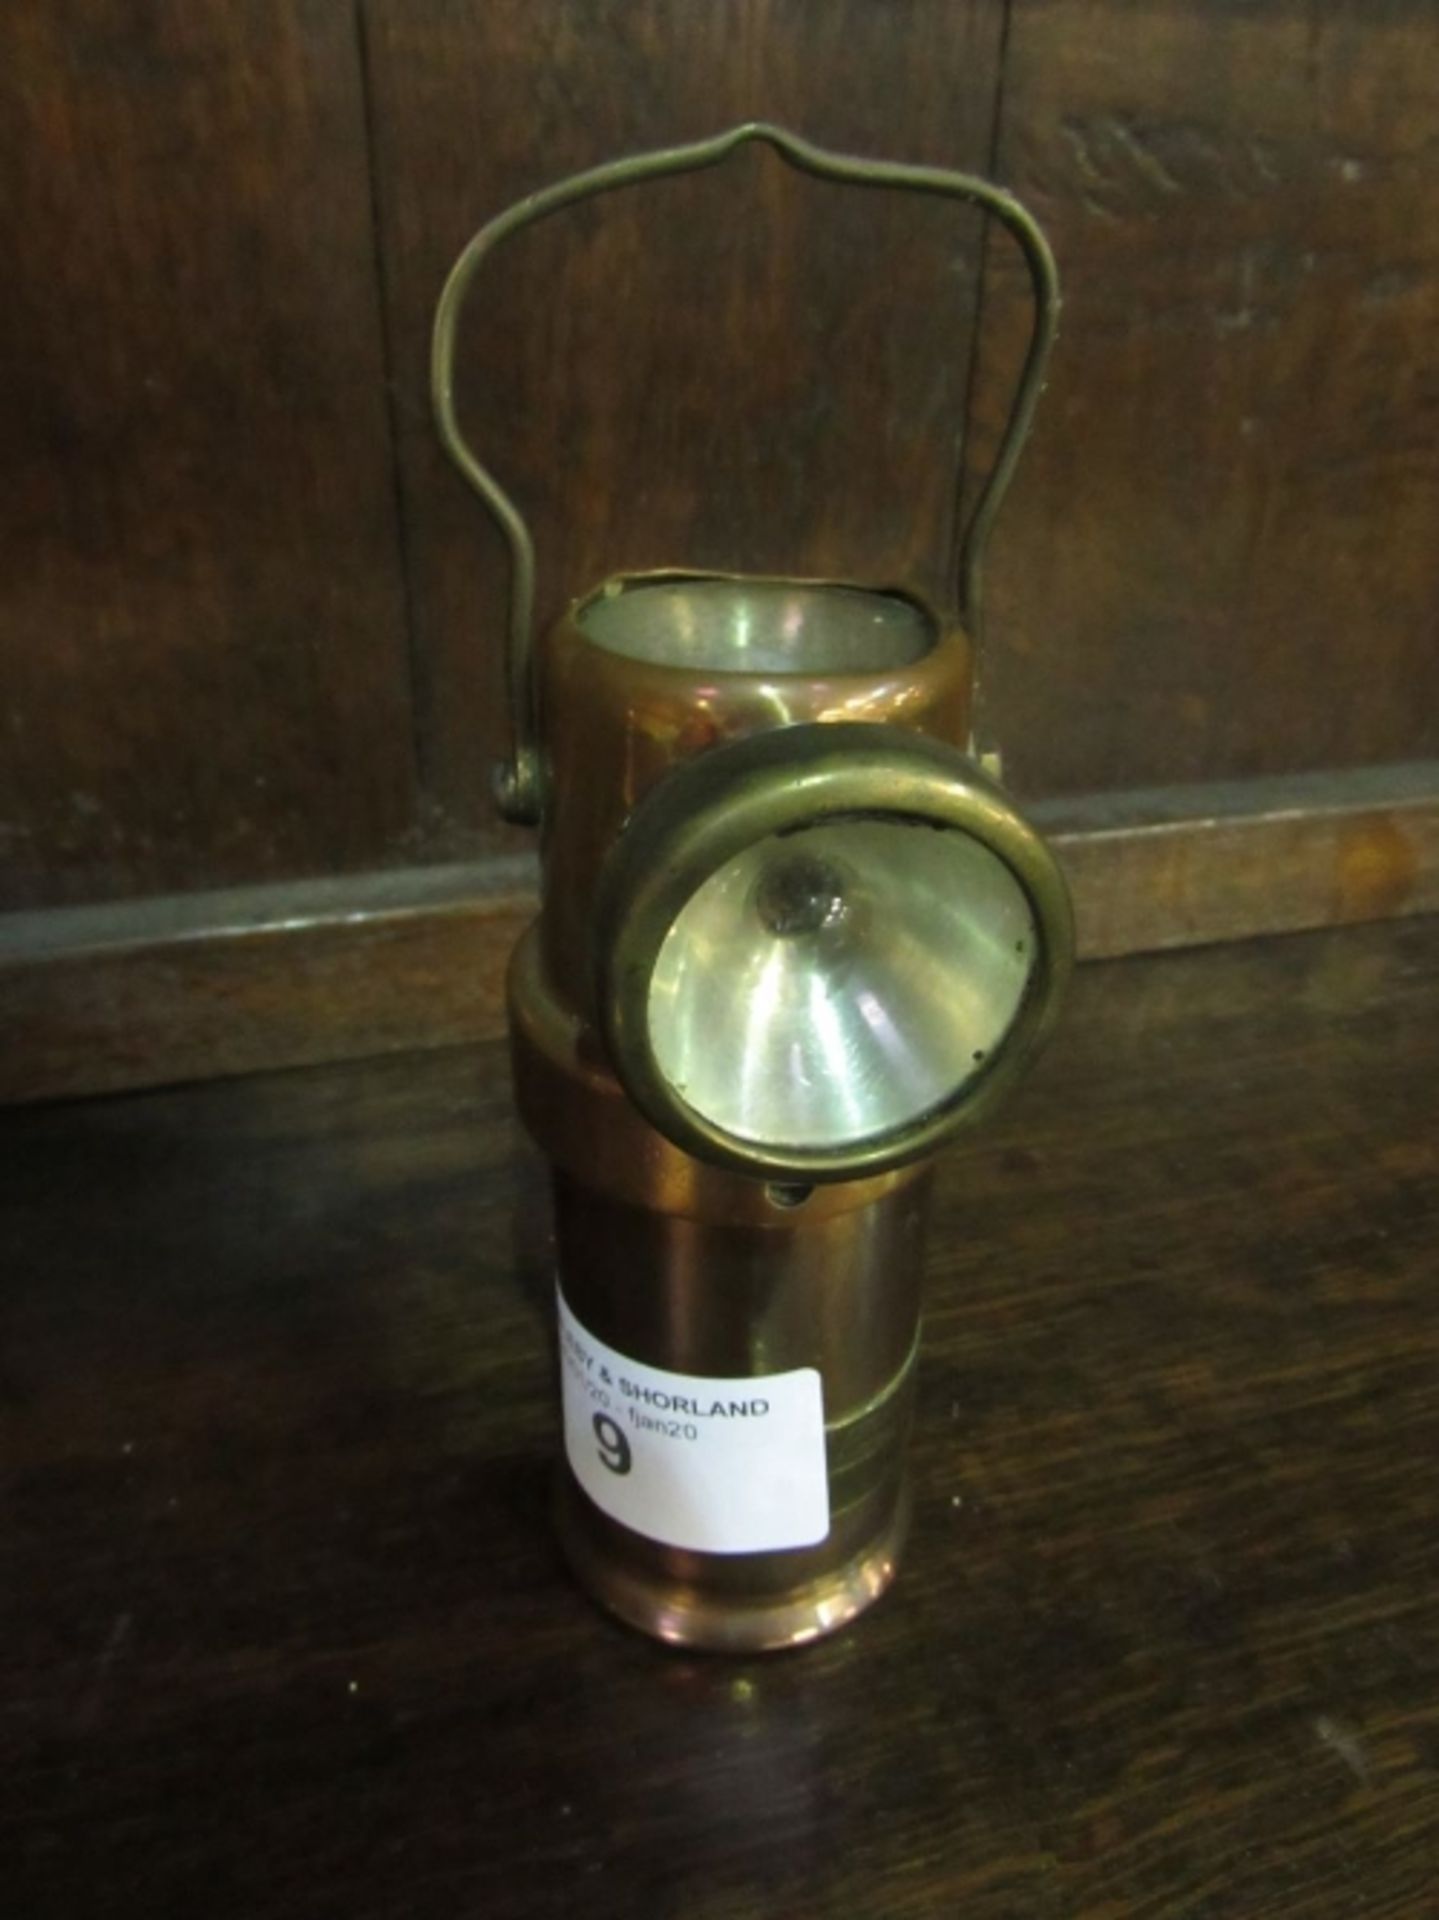 The Ceag Miners Supply Co. Ltd of Barnsley type BE3 copper cased electric torch